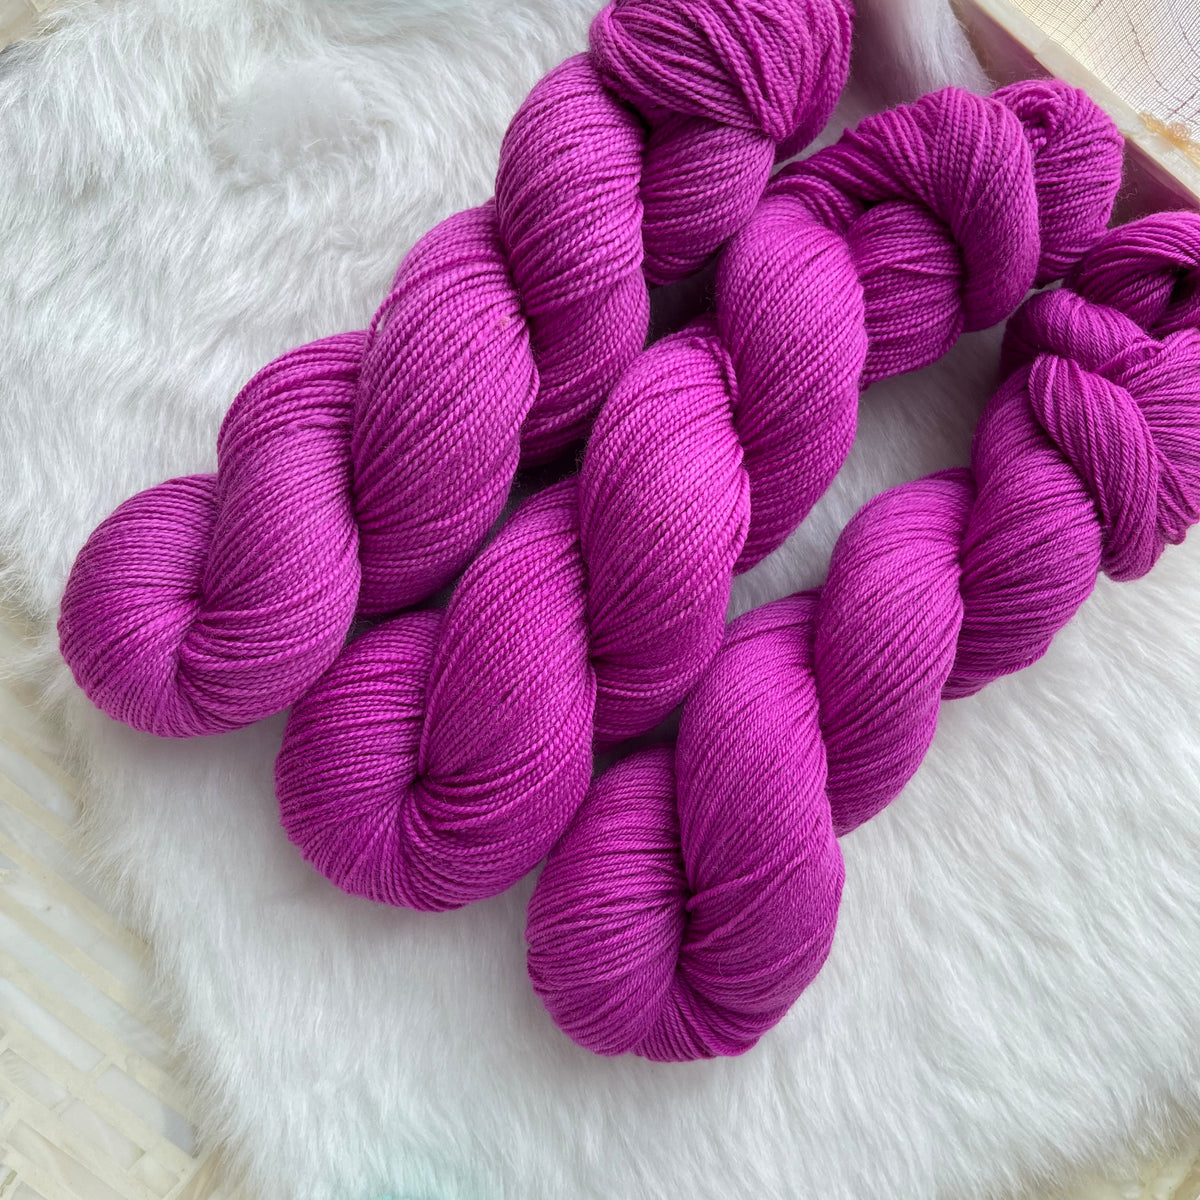 TODAY OR NEVER - Dyed to Order - Hand Dyed Yarn Skein